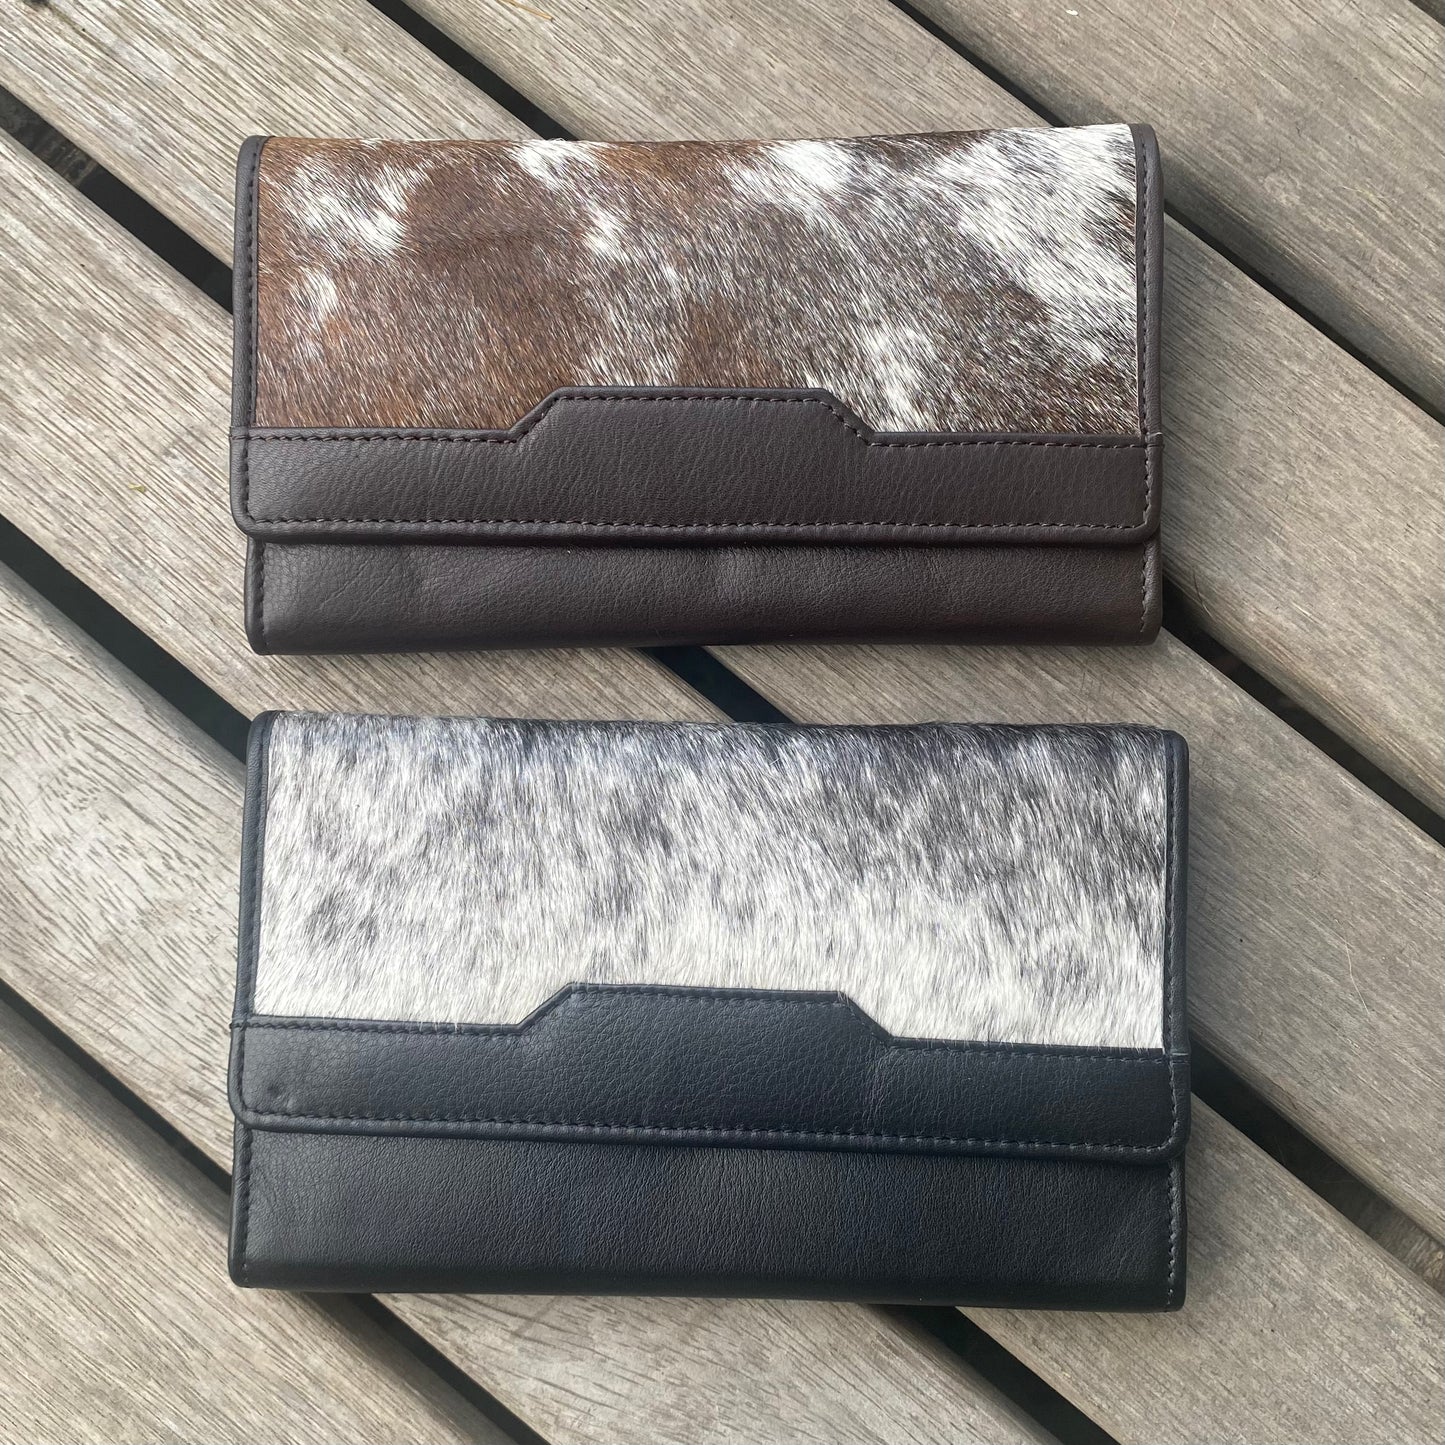 Trifold Cowhide Wallet